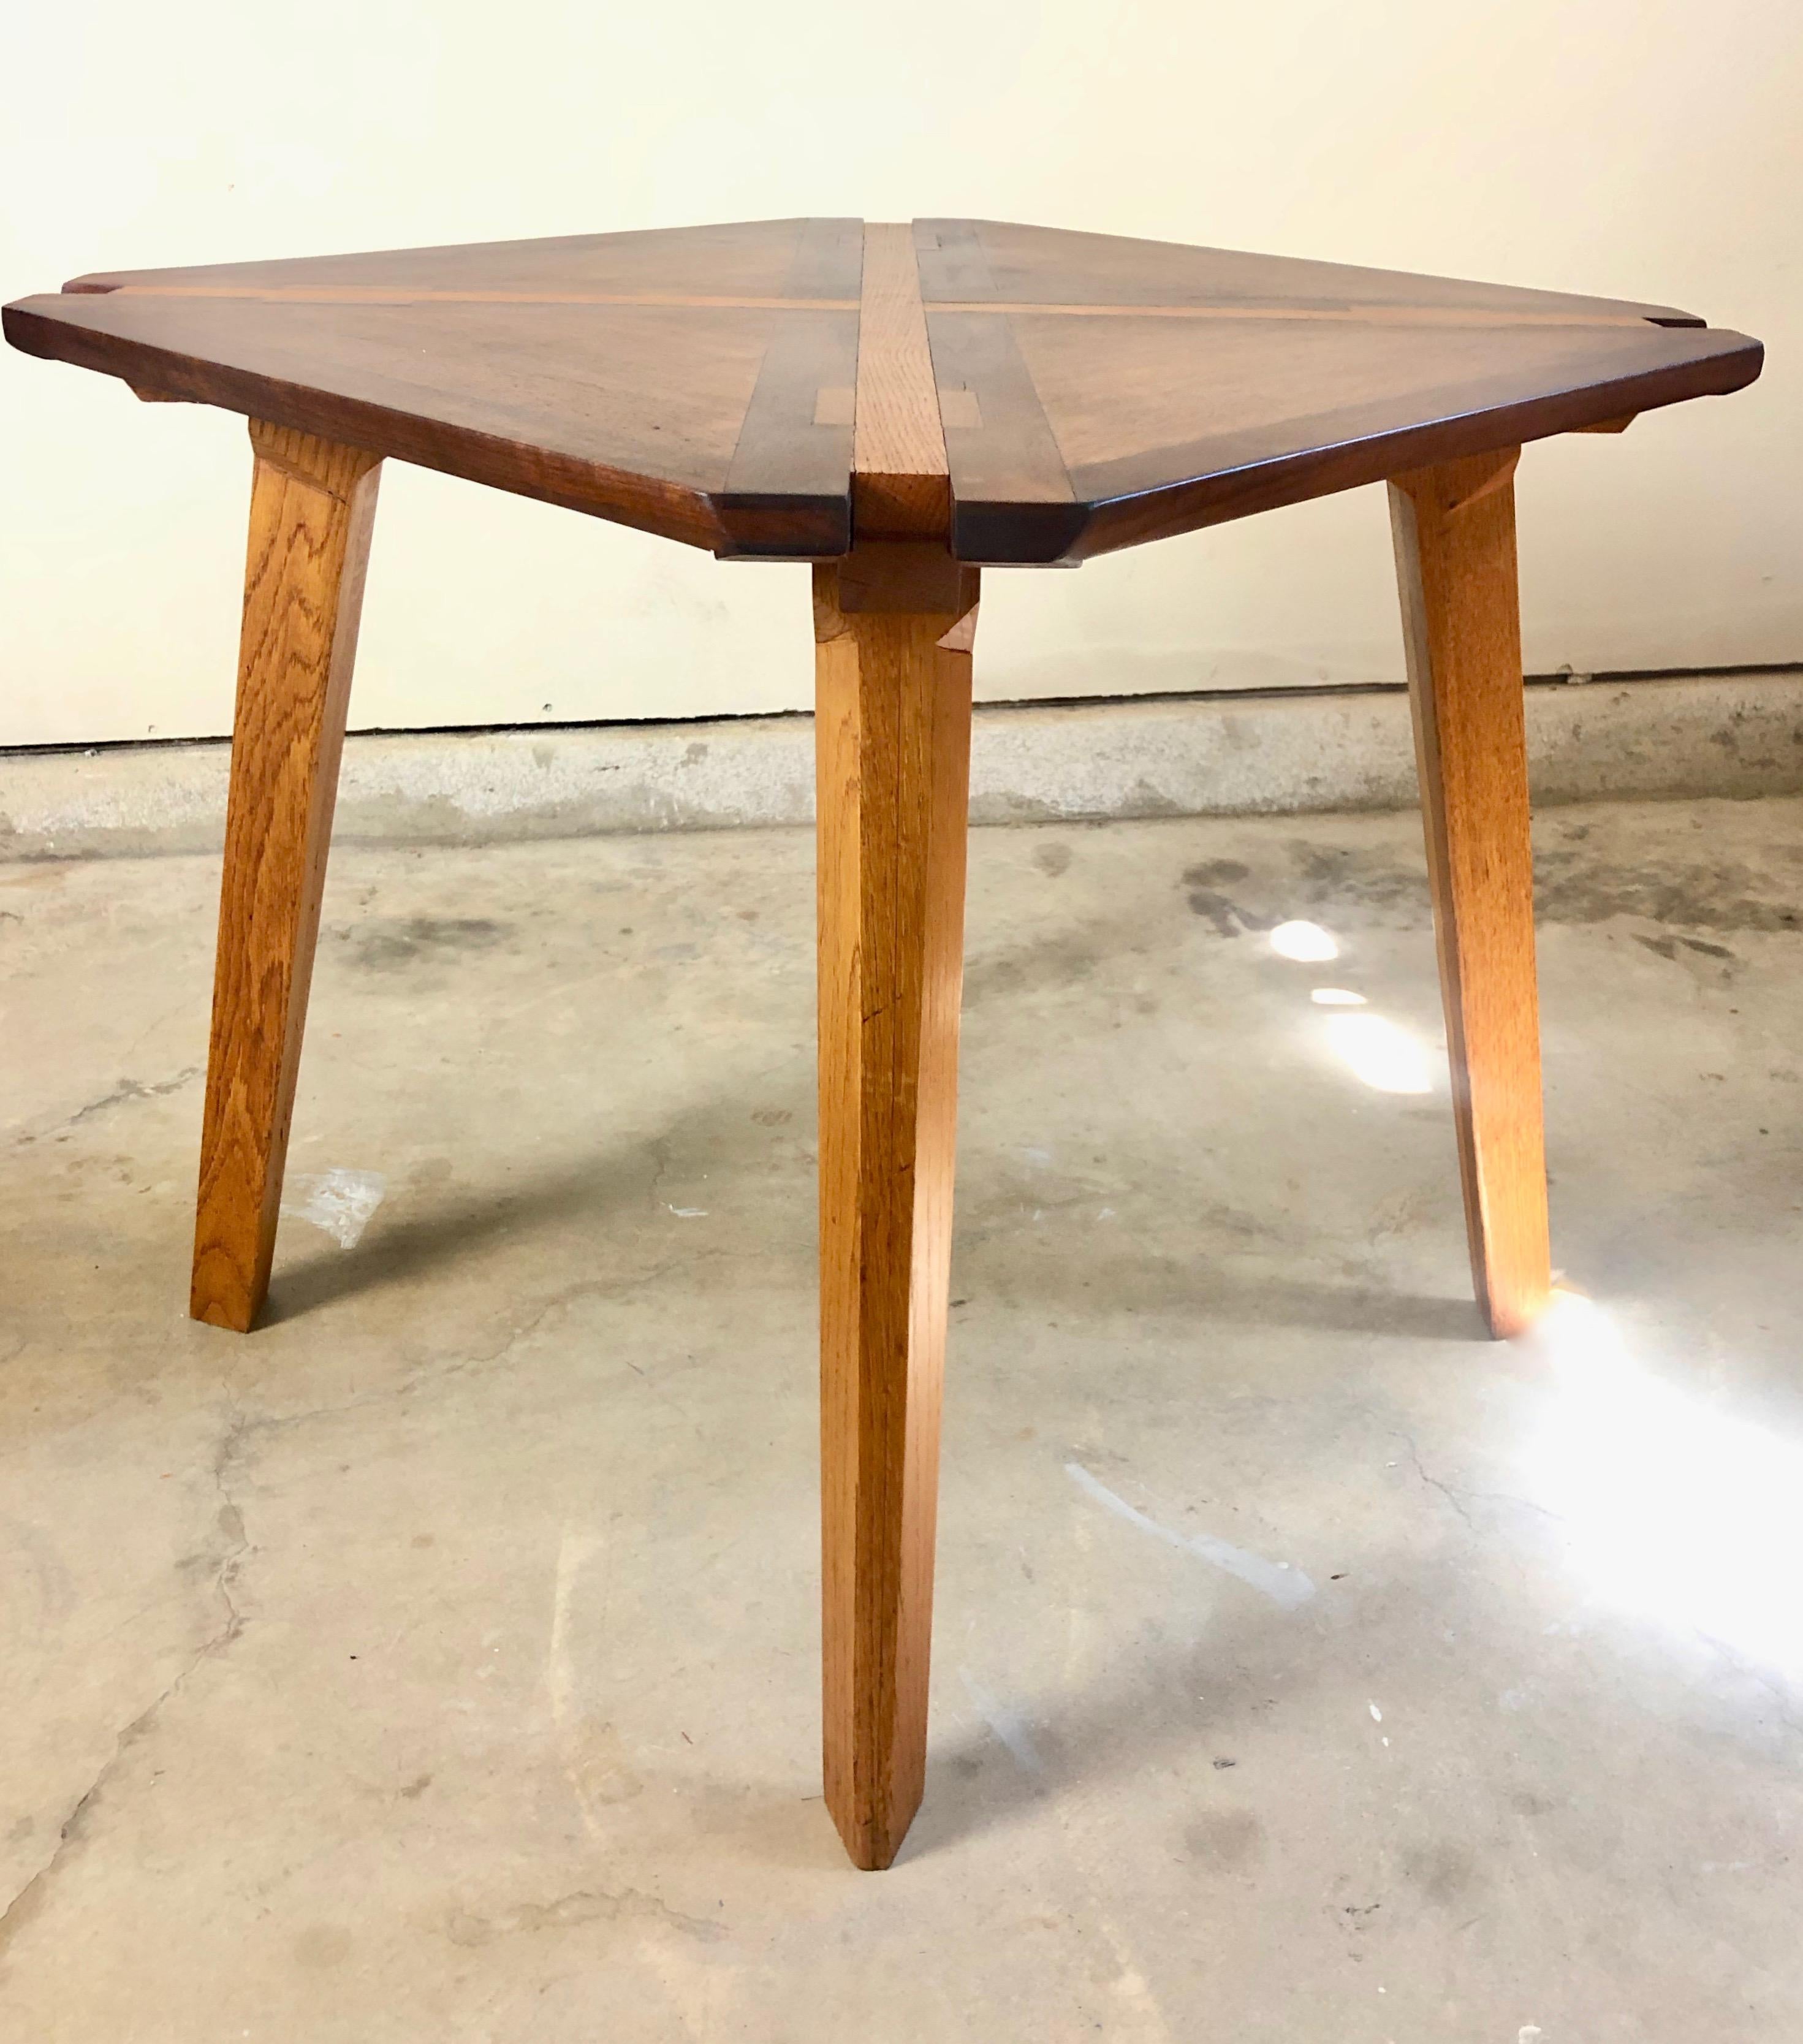 Studio Crafted Mixed Woods Dining Table / Game Table 5